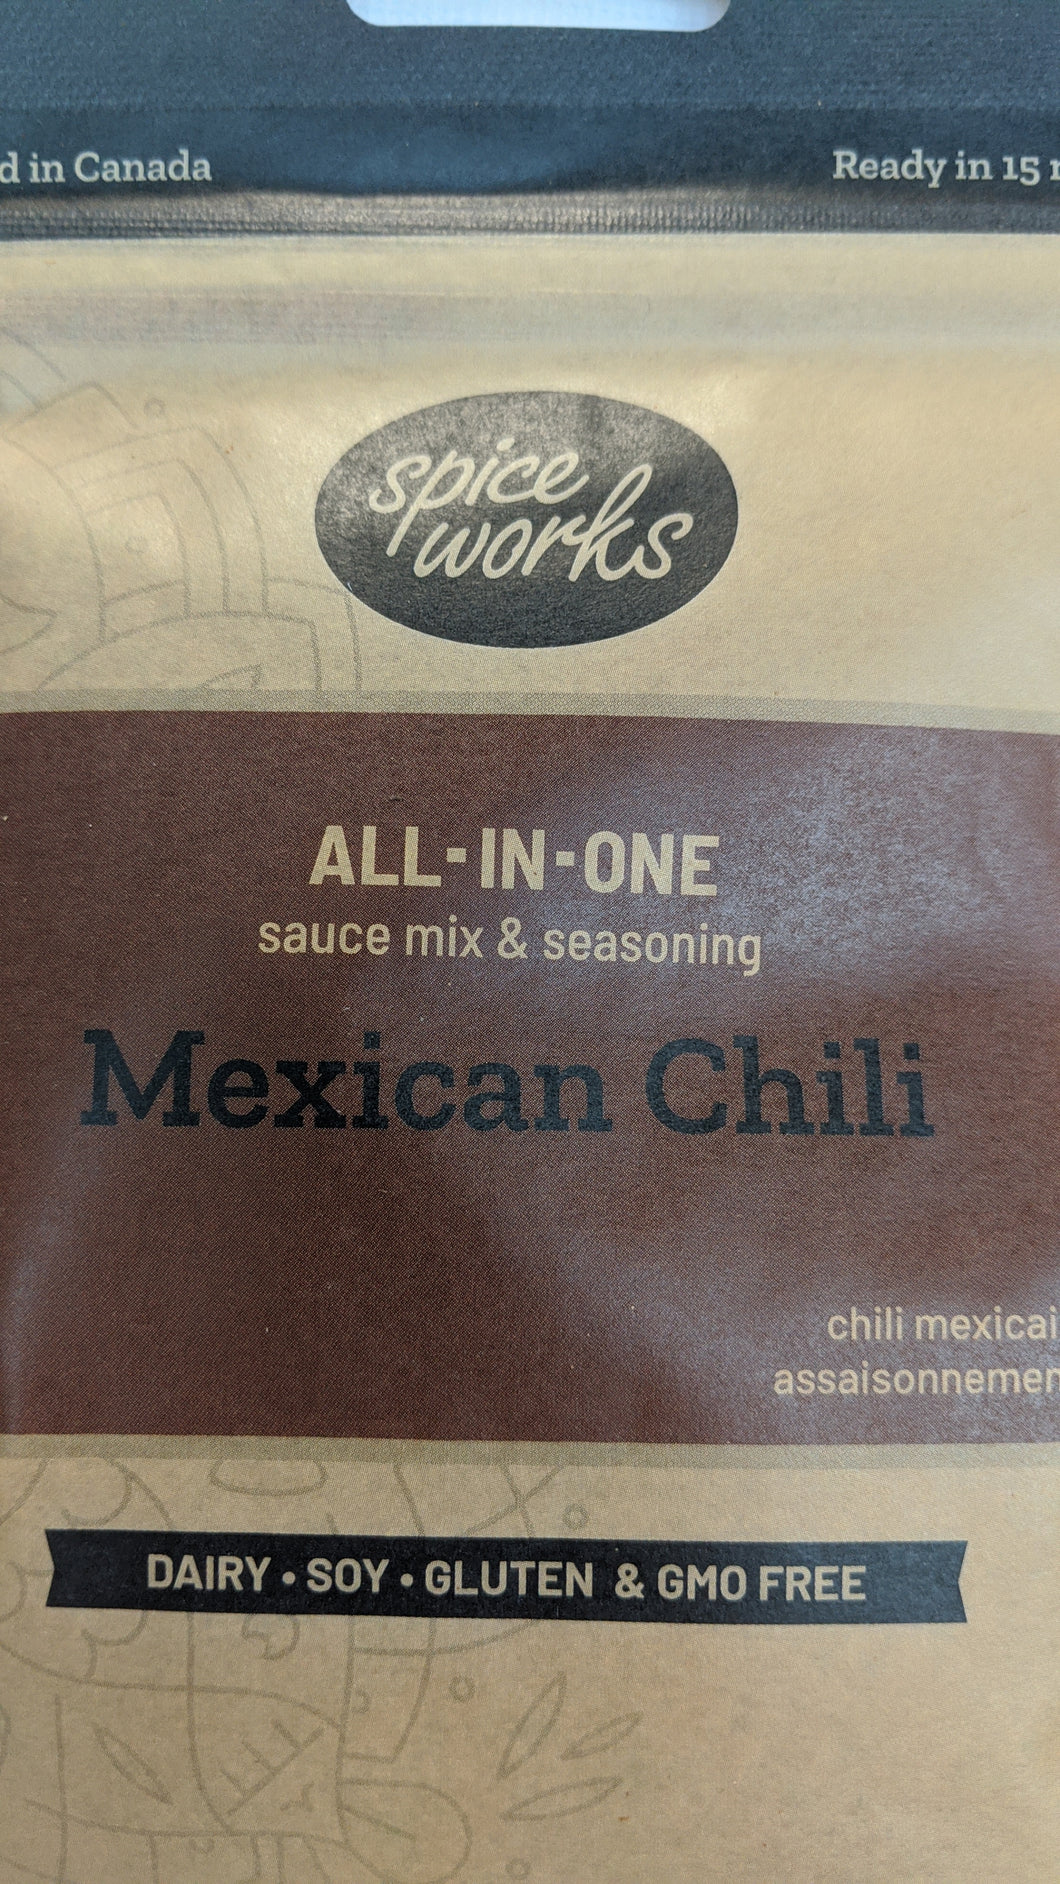 Spice Works - Mexican Chili sauce mix & seasoning